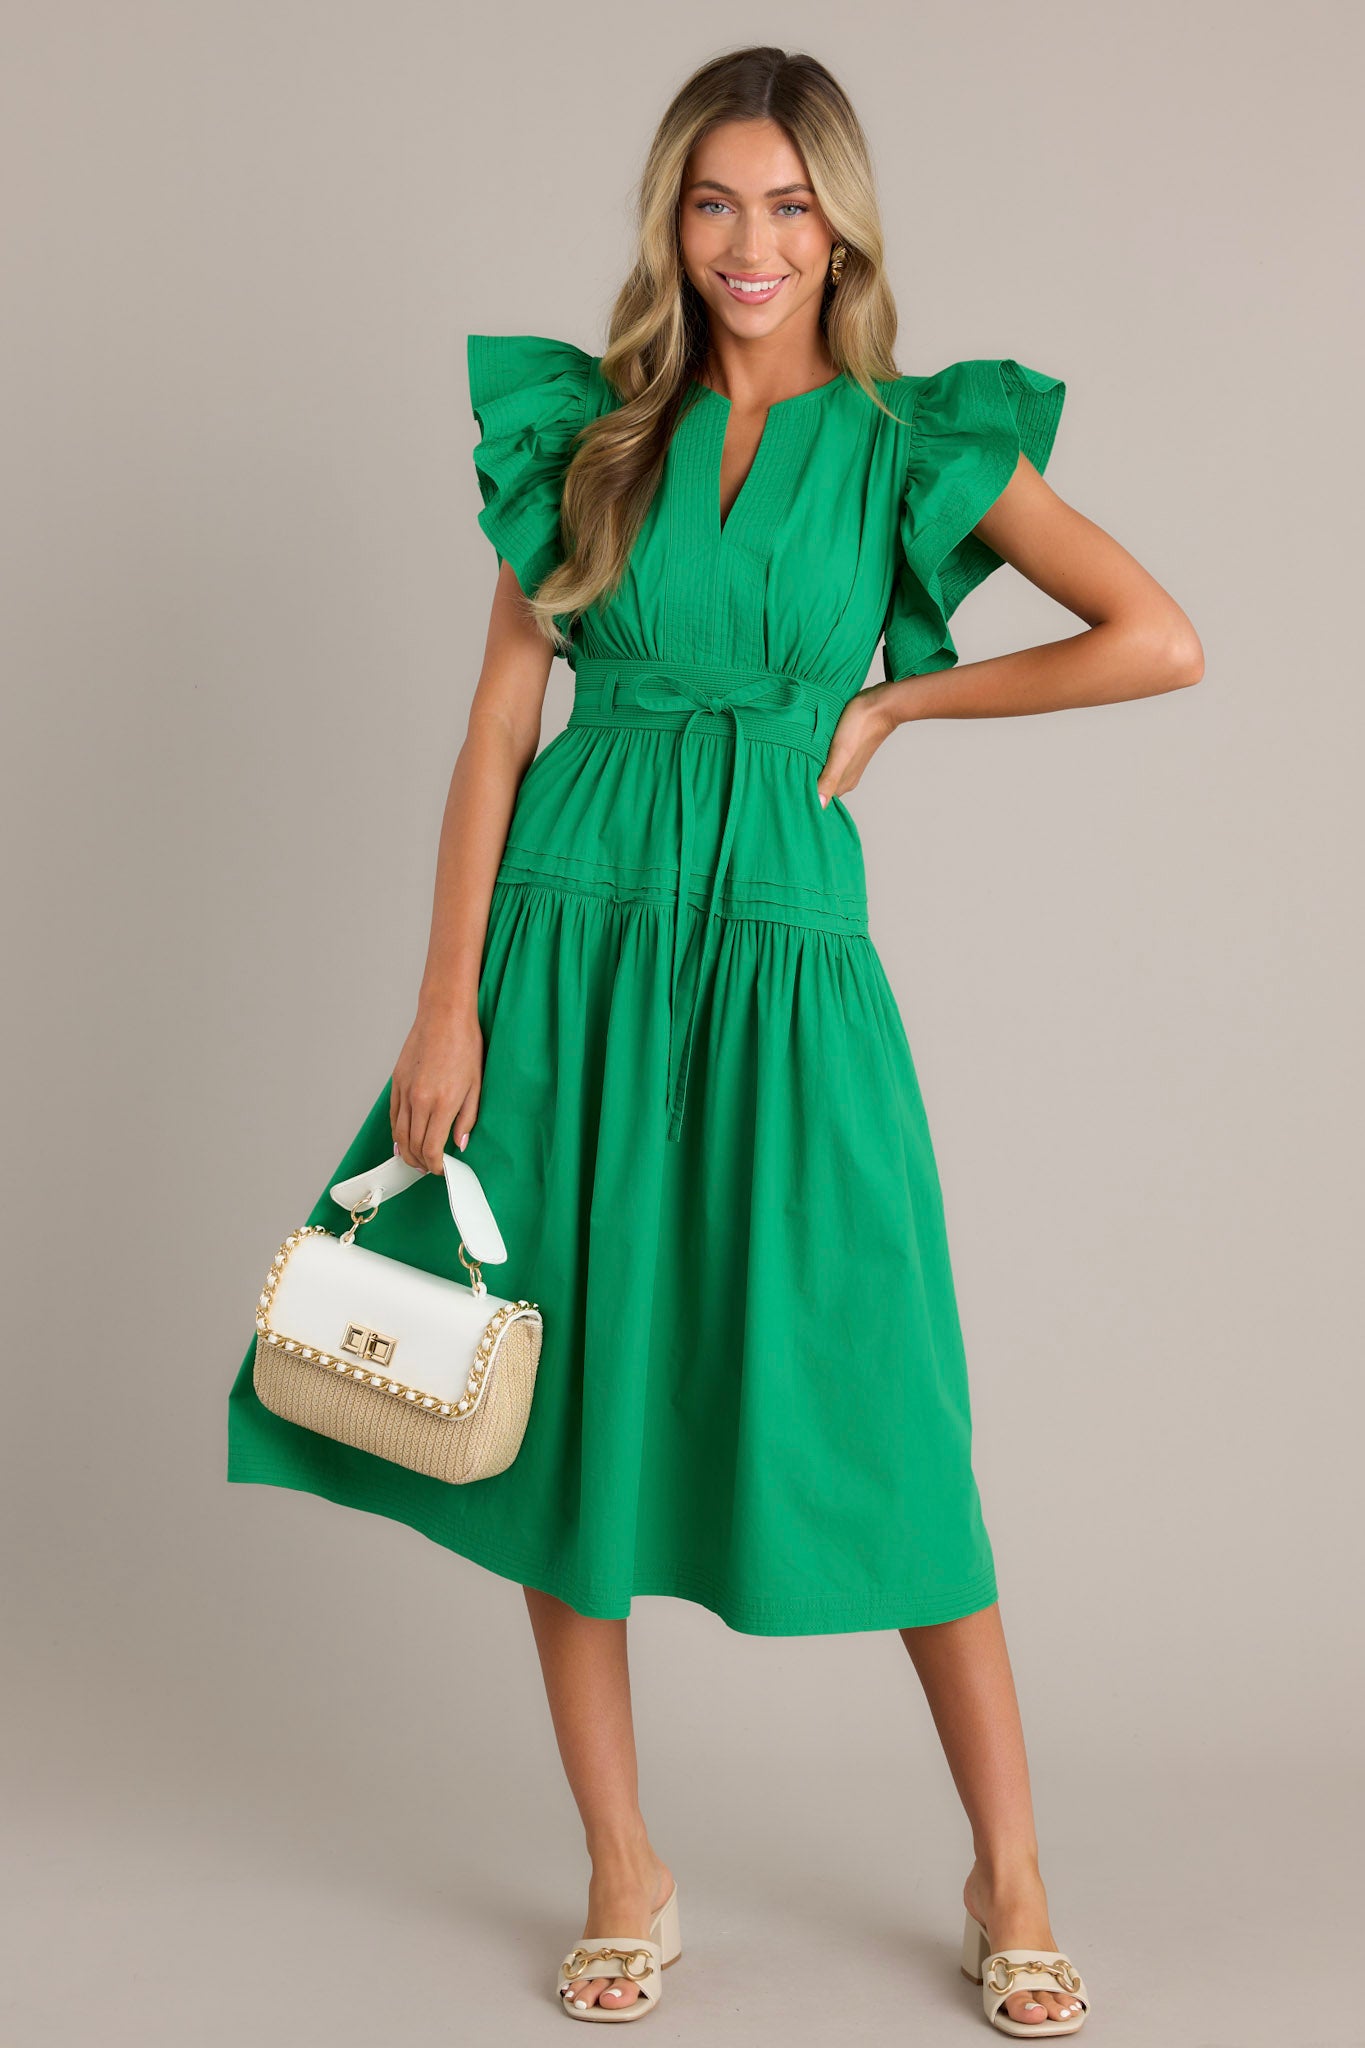 This green midi dress features a v-neckline, subtle chest pleats, a discrete side zipper, a thick waistband with a self-tie belt, a smocked waist insert, functional hip pockets, a single tier, and ruffled short sleeves.